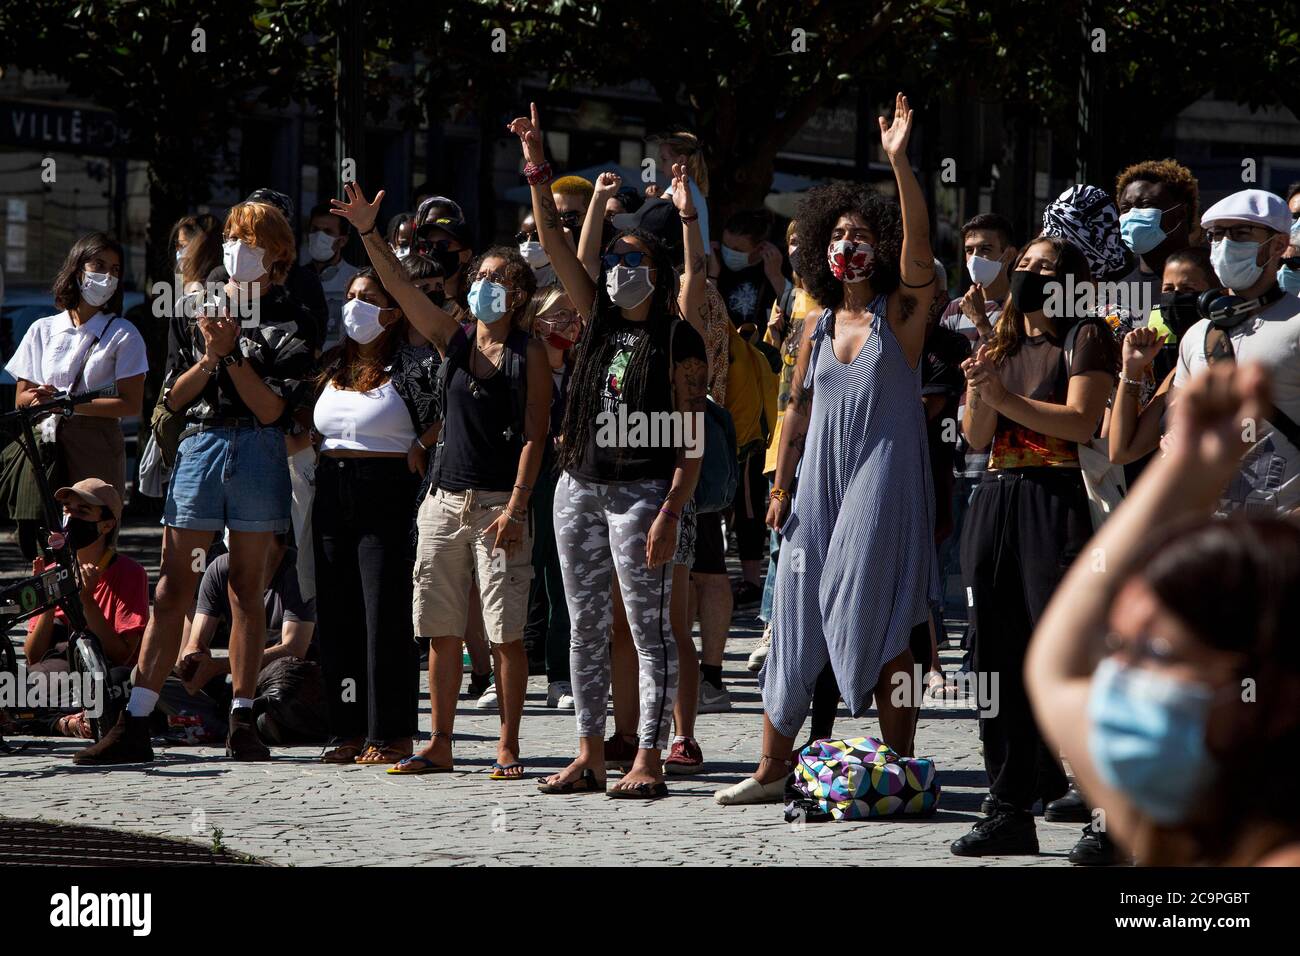 Protesters raise their hands during the demonstration.Hundreds of Black lives Mater protesters took over the streets to demand justice for Bruno Cande, a Black actor who was shot dead by a white man on a busy street last weekend. Stock Photo